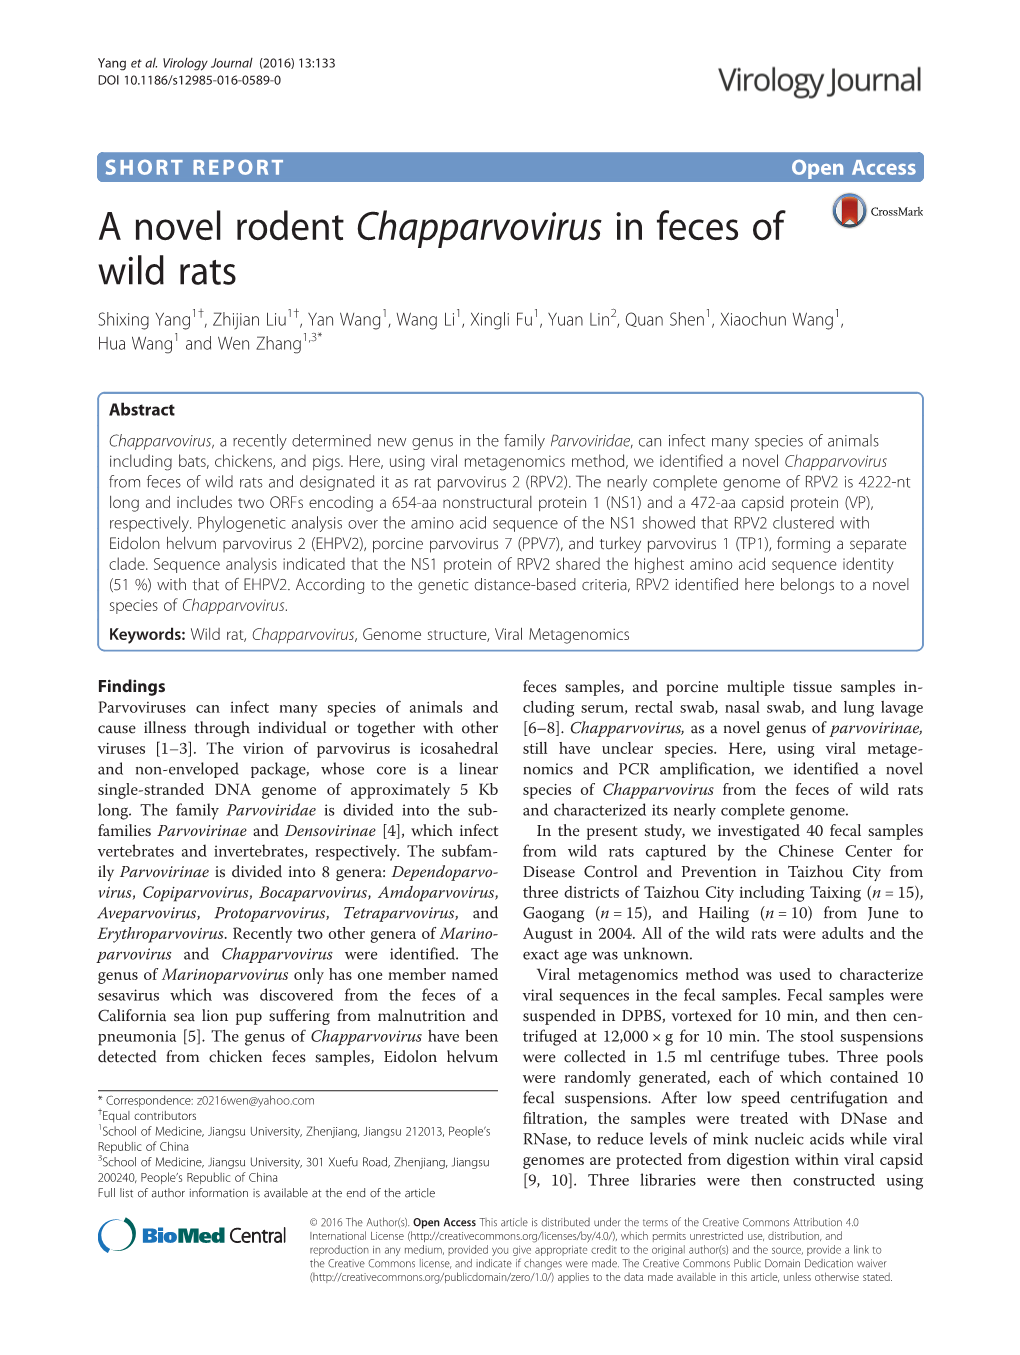 A Novel Rodent Chapparvovirus in Feces of Wild Rats